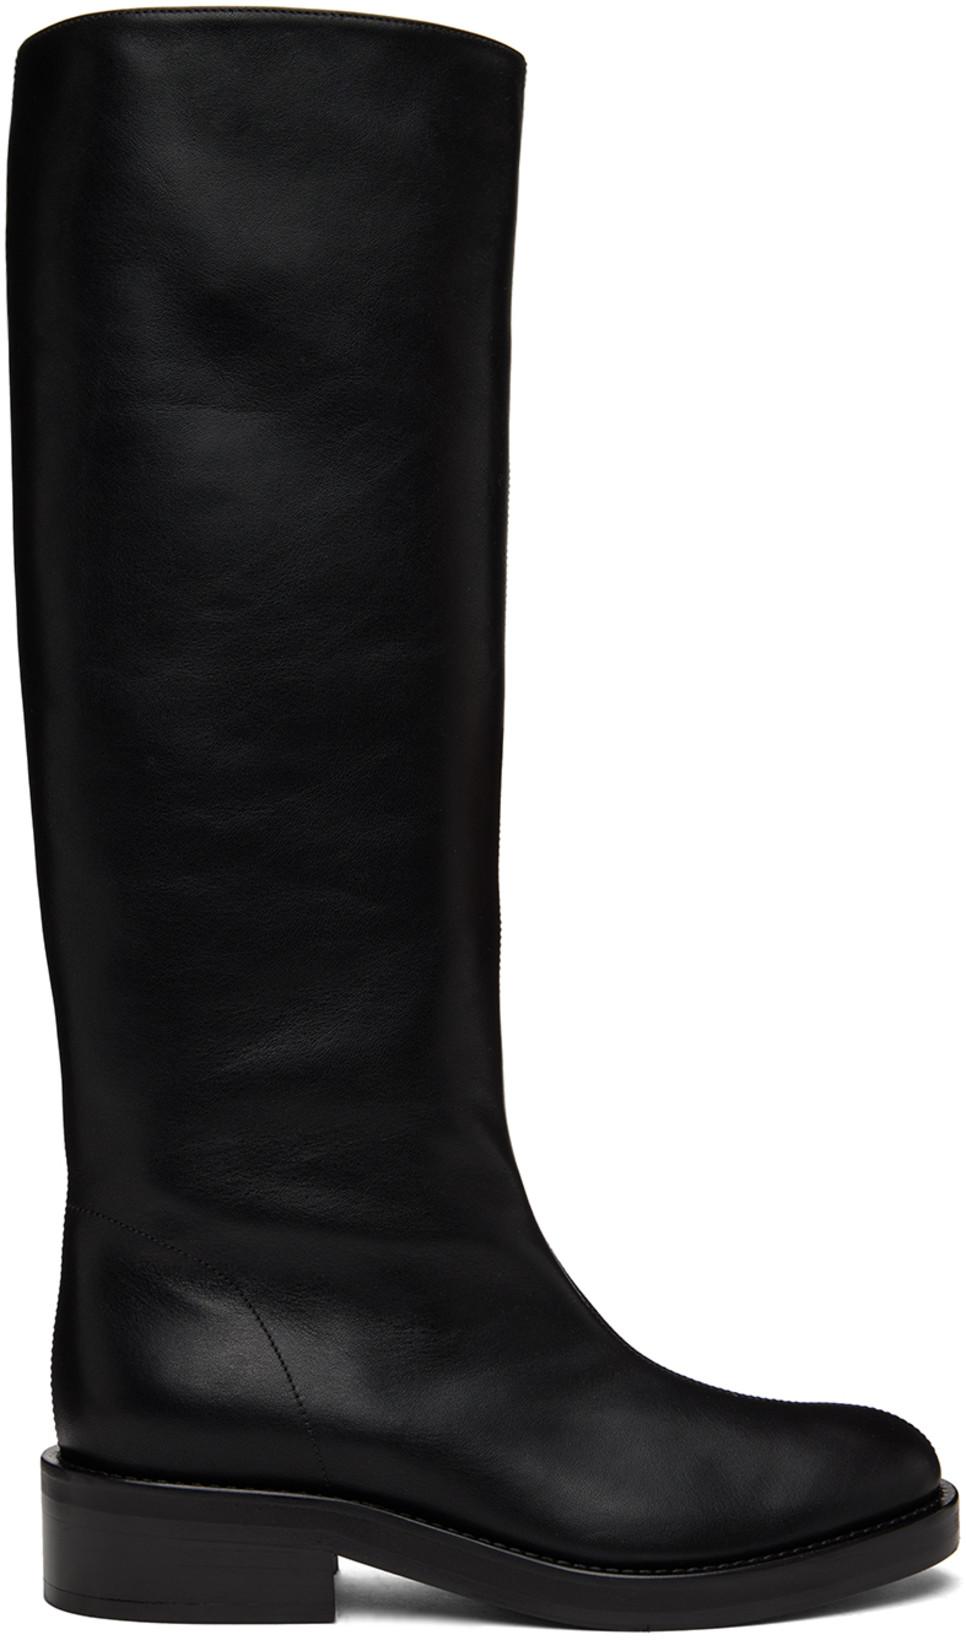 Black Riding Boots by CO